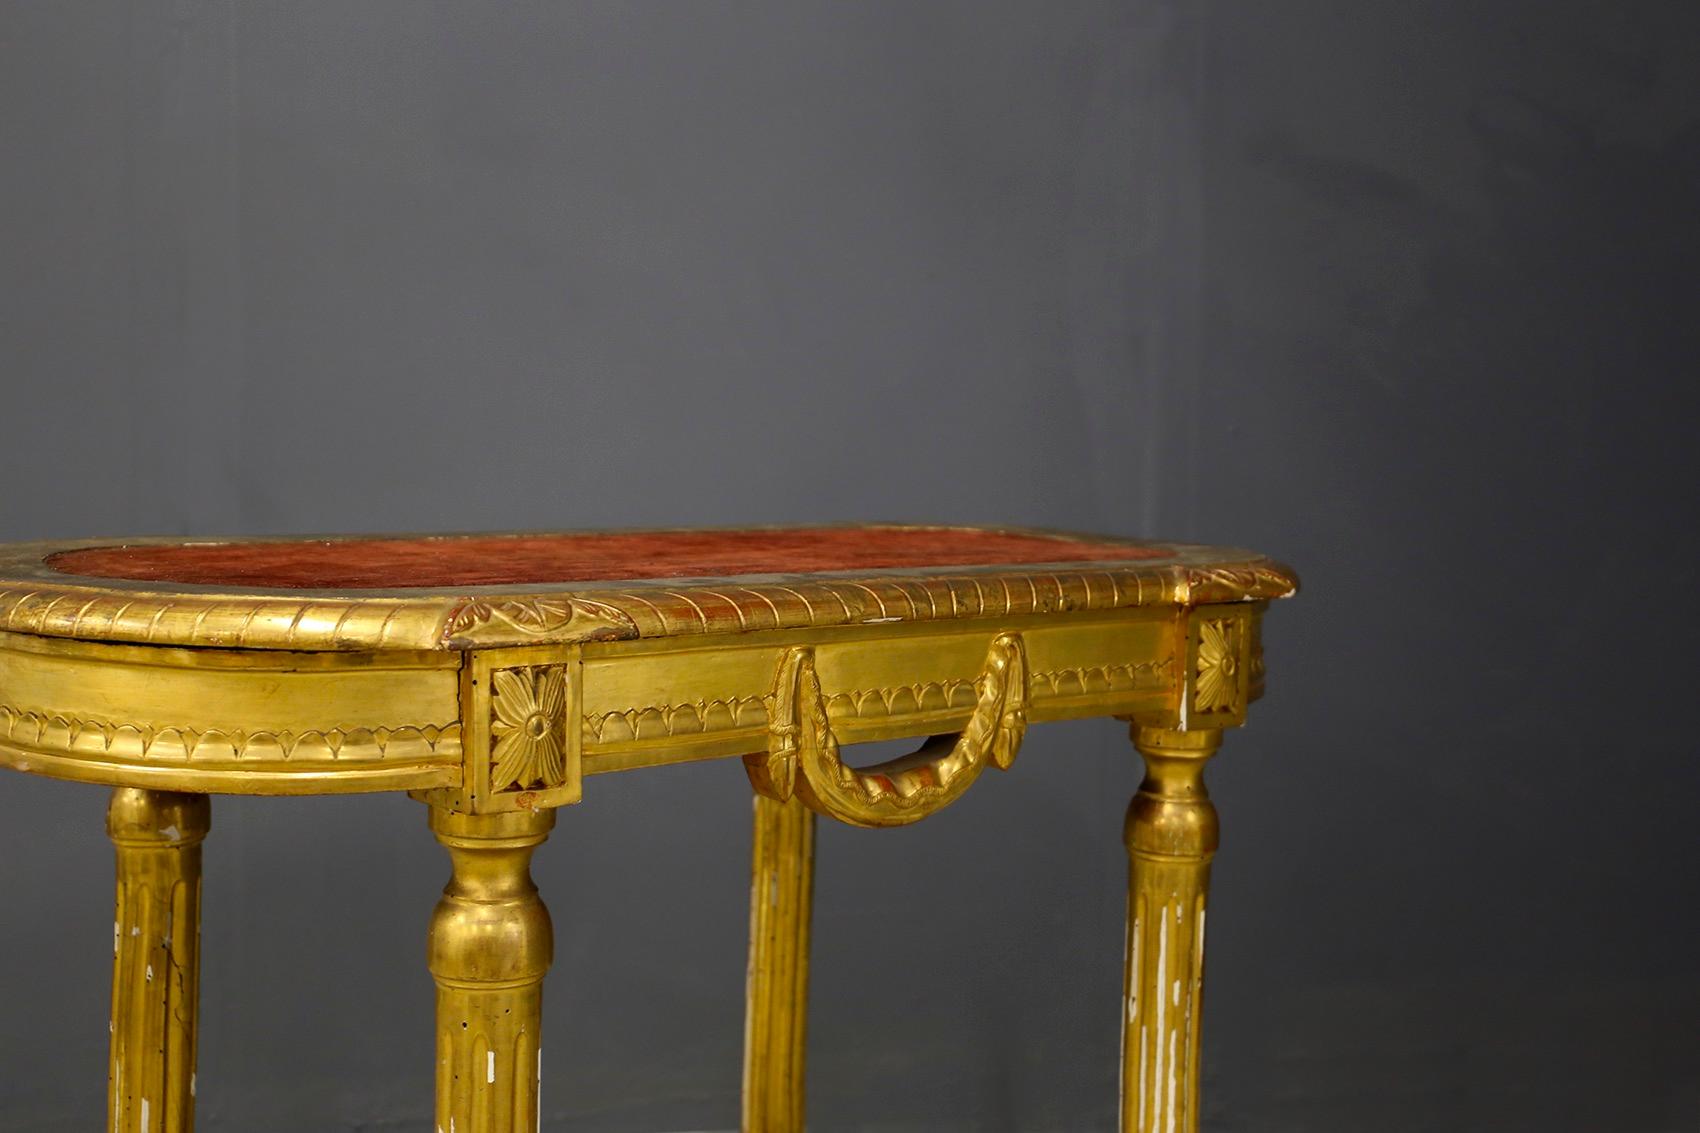 Antique Consolle in wood gilded end 1800 beginning 1900. The particularity of the console and its top covered with original velvet of the time of dark orange color. the wood of the console is sttao skillfully worked inlay. Detail to note at the